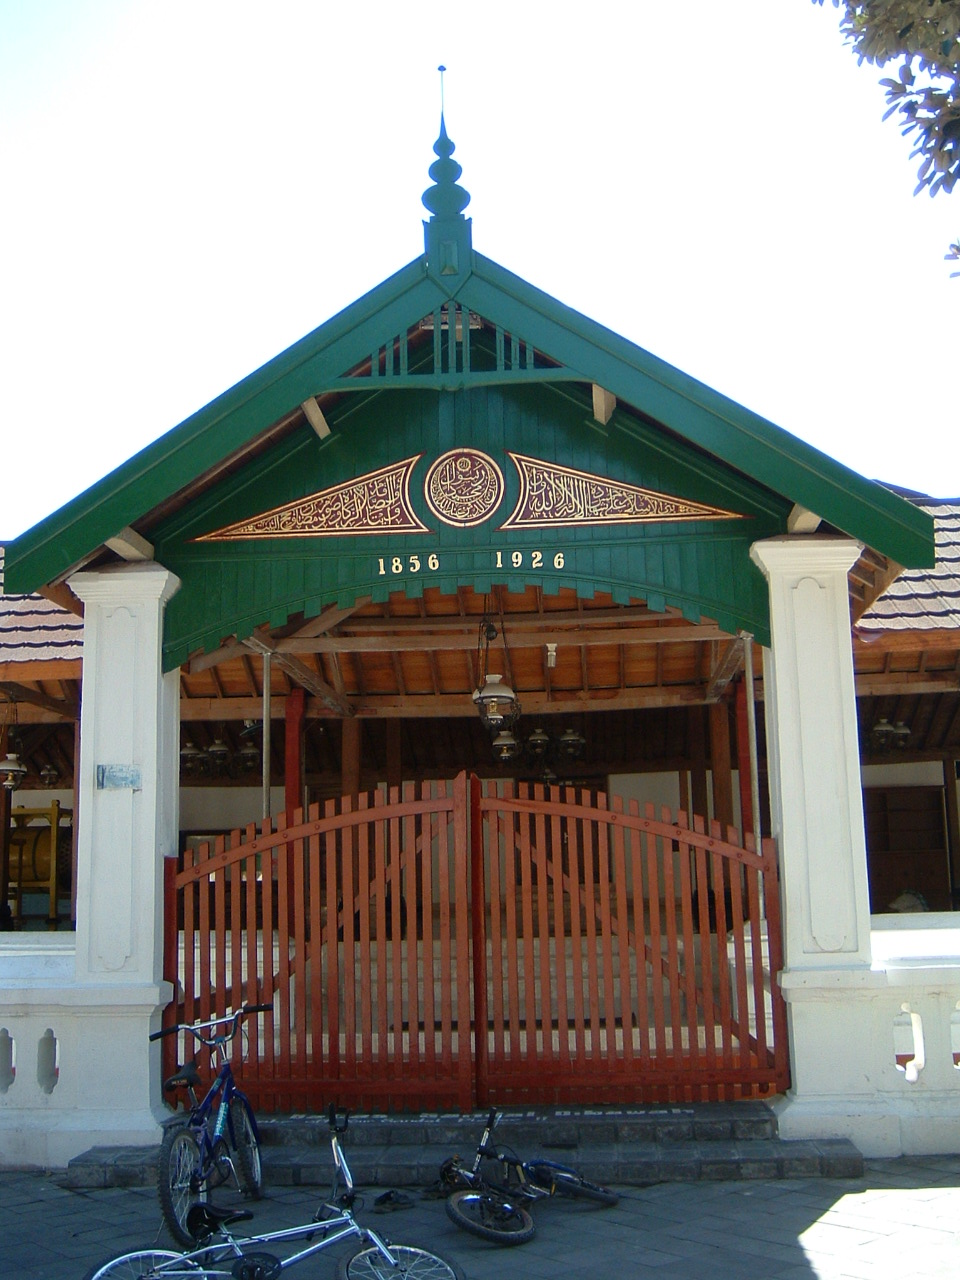 Exterior view showing the mosque entry gate with Arabic inscription on gable